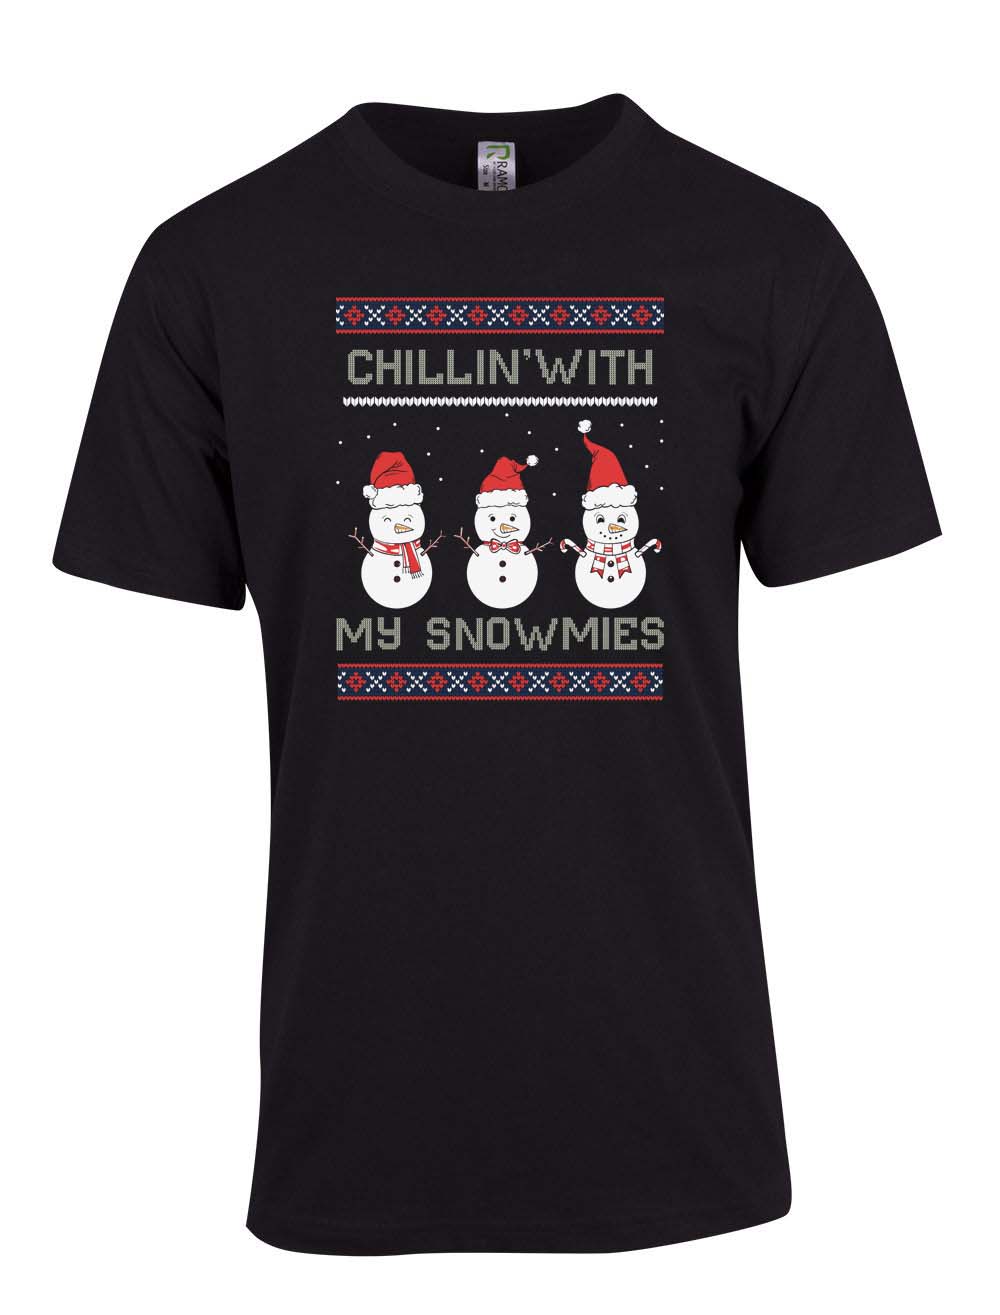 Chillin with my snowmies Christmas T Shirt